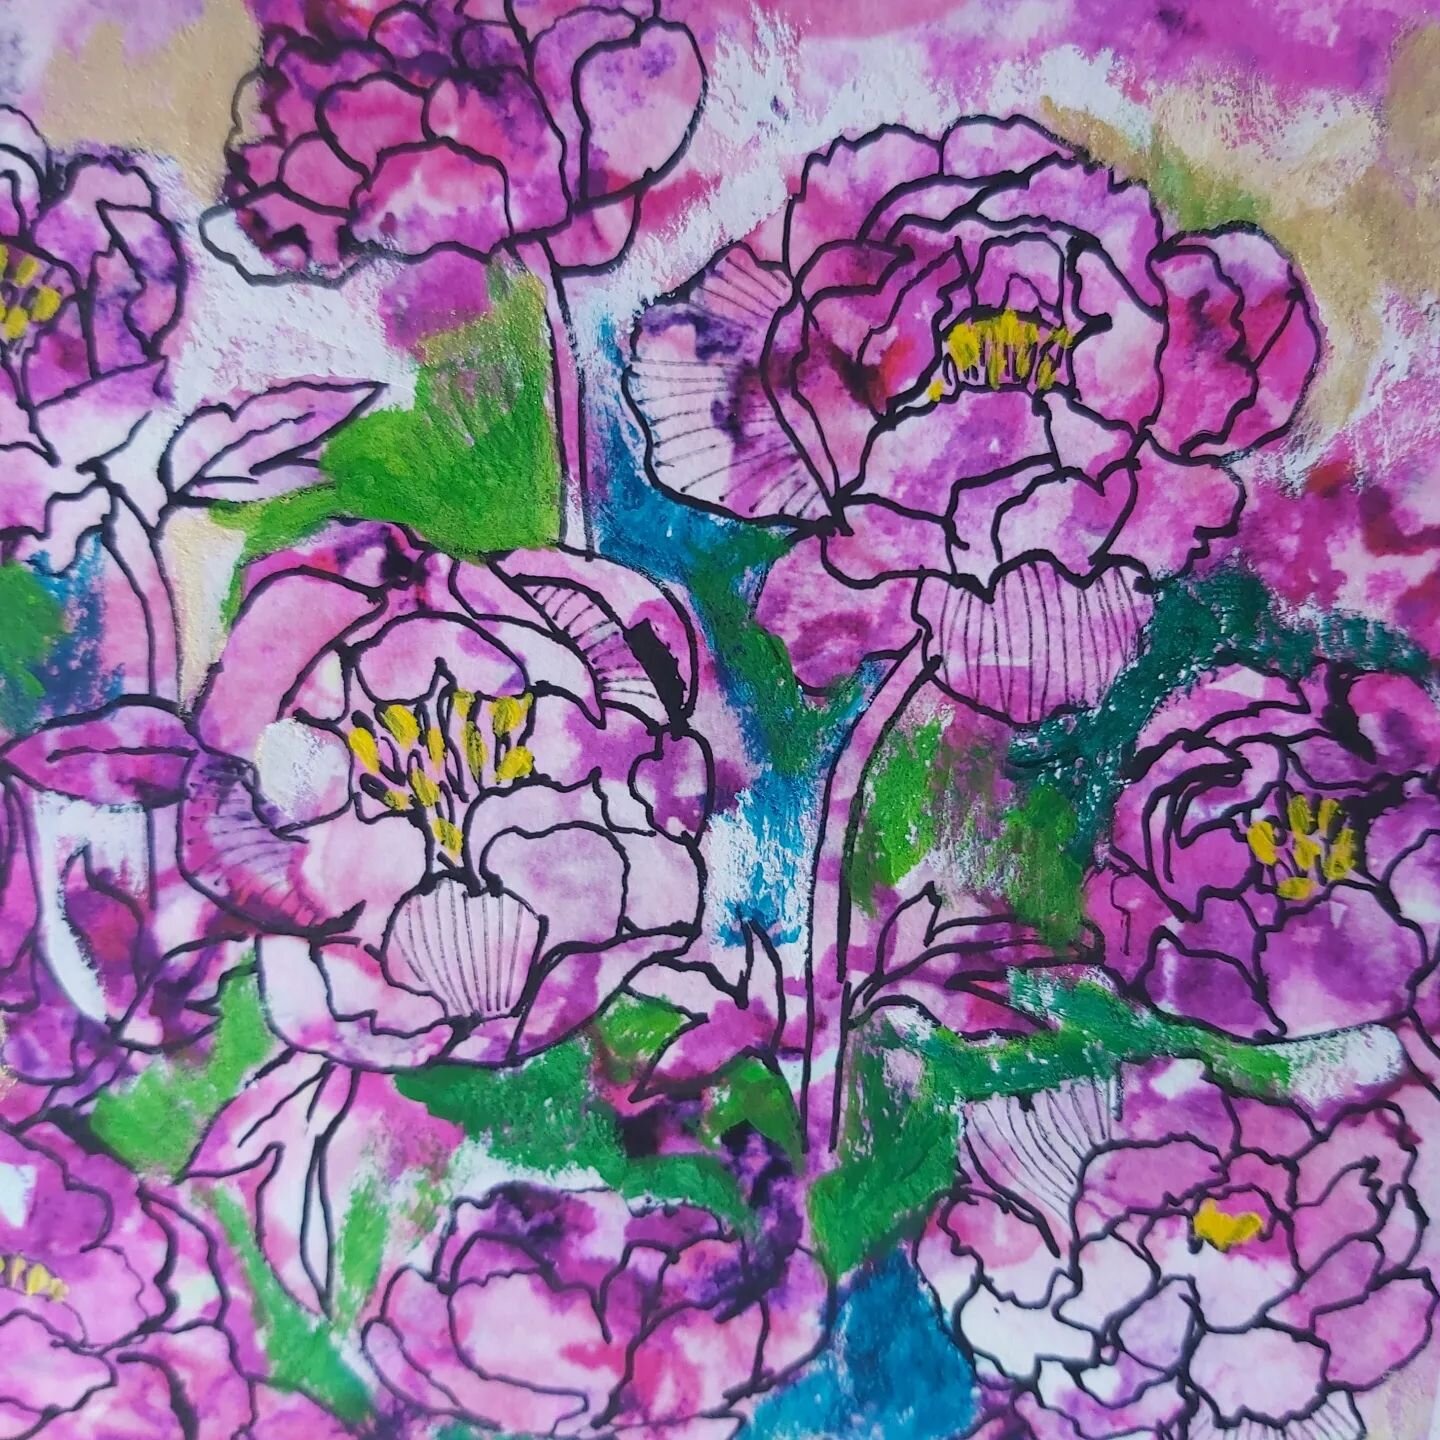 For the past 2 weeks, I've been experimenting with inkjet prints, ink pens and acrylic paint to create artworks. This one features peony flowers. The background is created from an abstract watercolour painting digitally manipulated in Photoshop, than